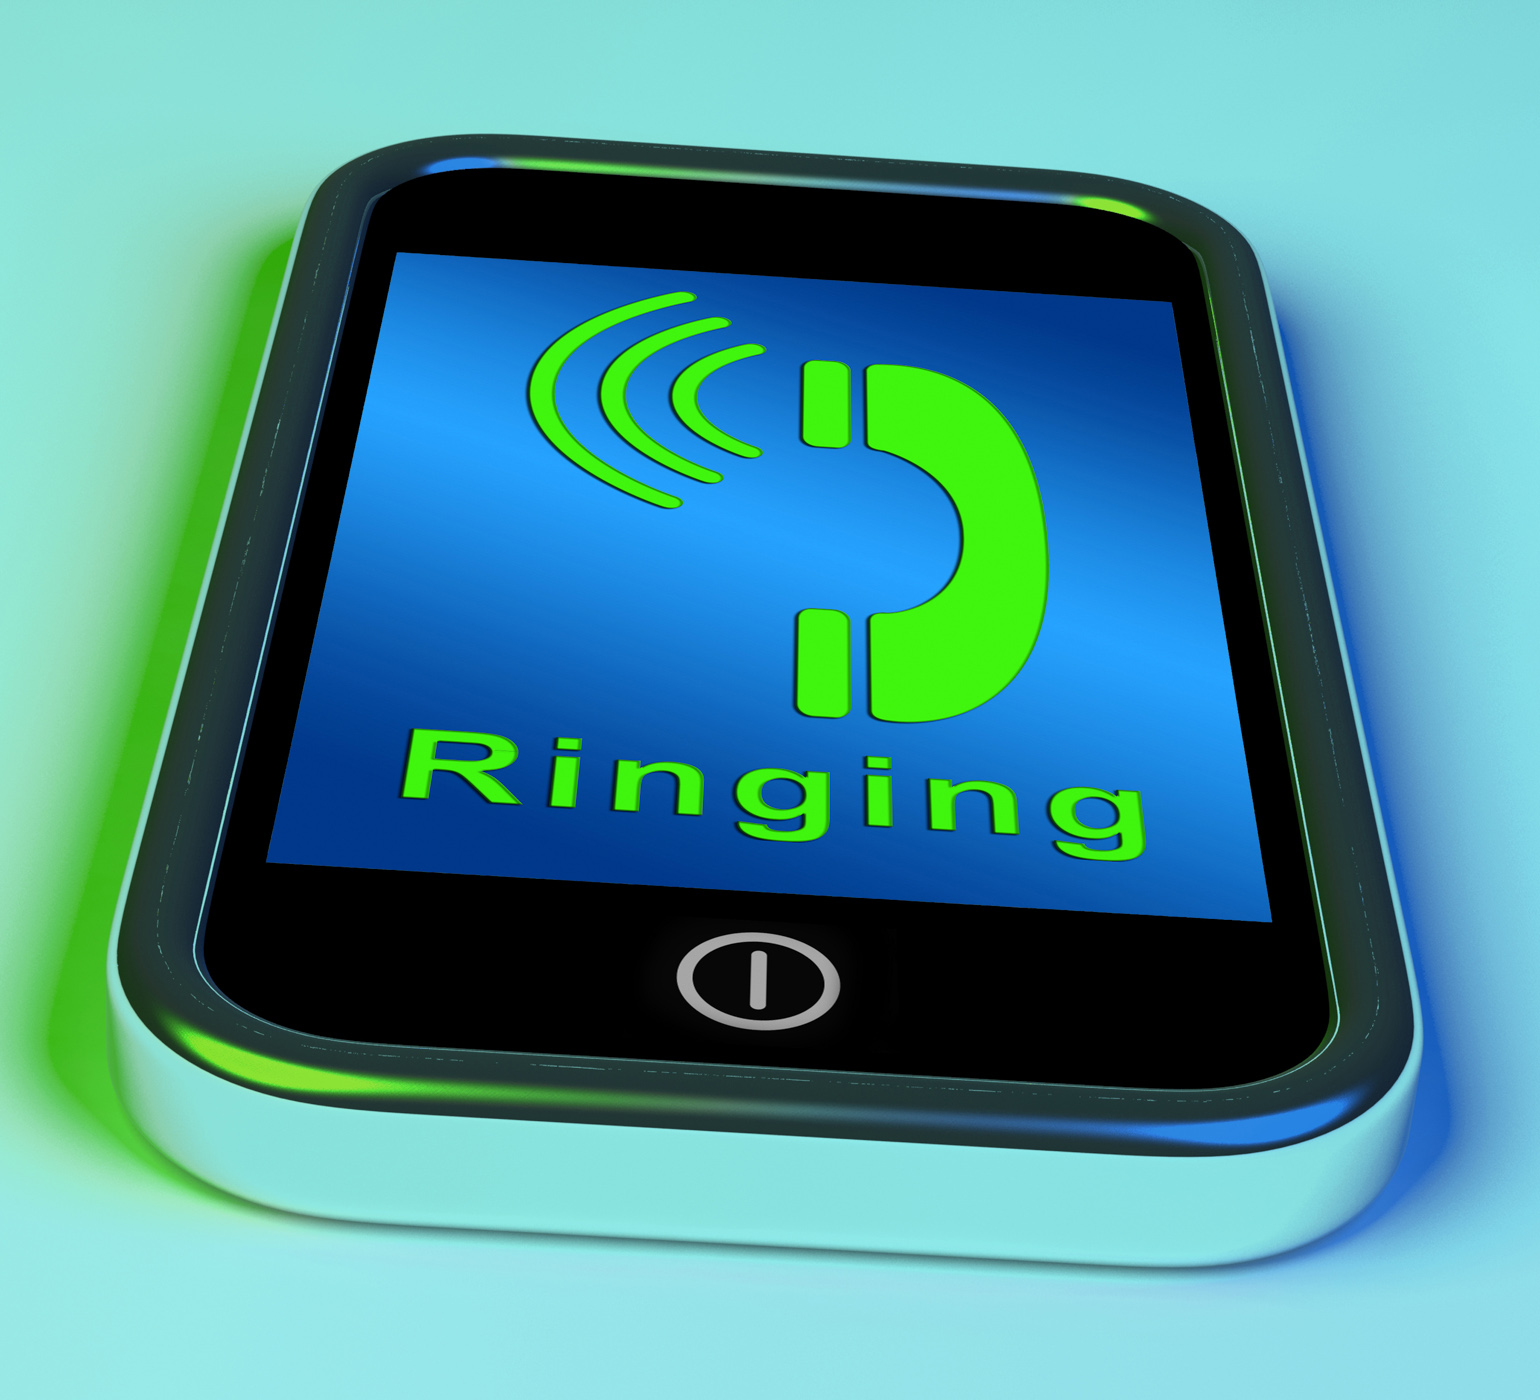 Ringing icon on a mobile phone showing smartphone call photo